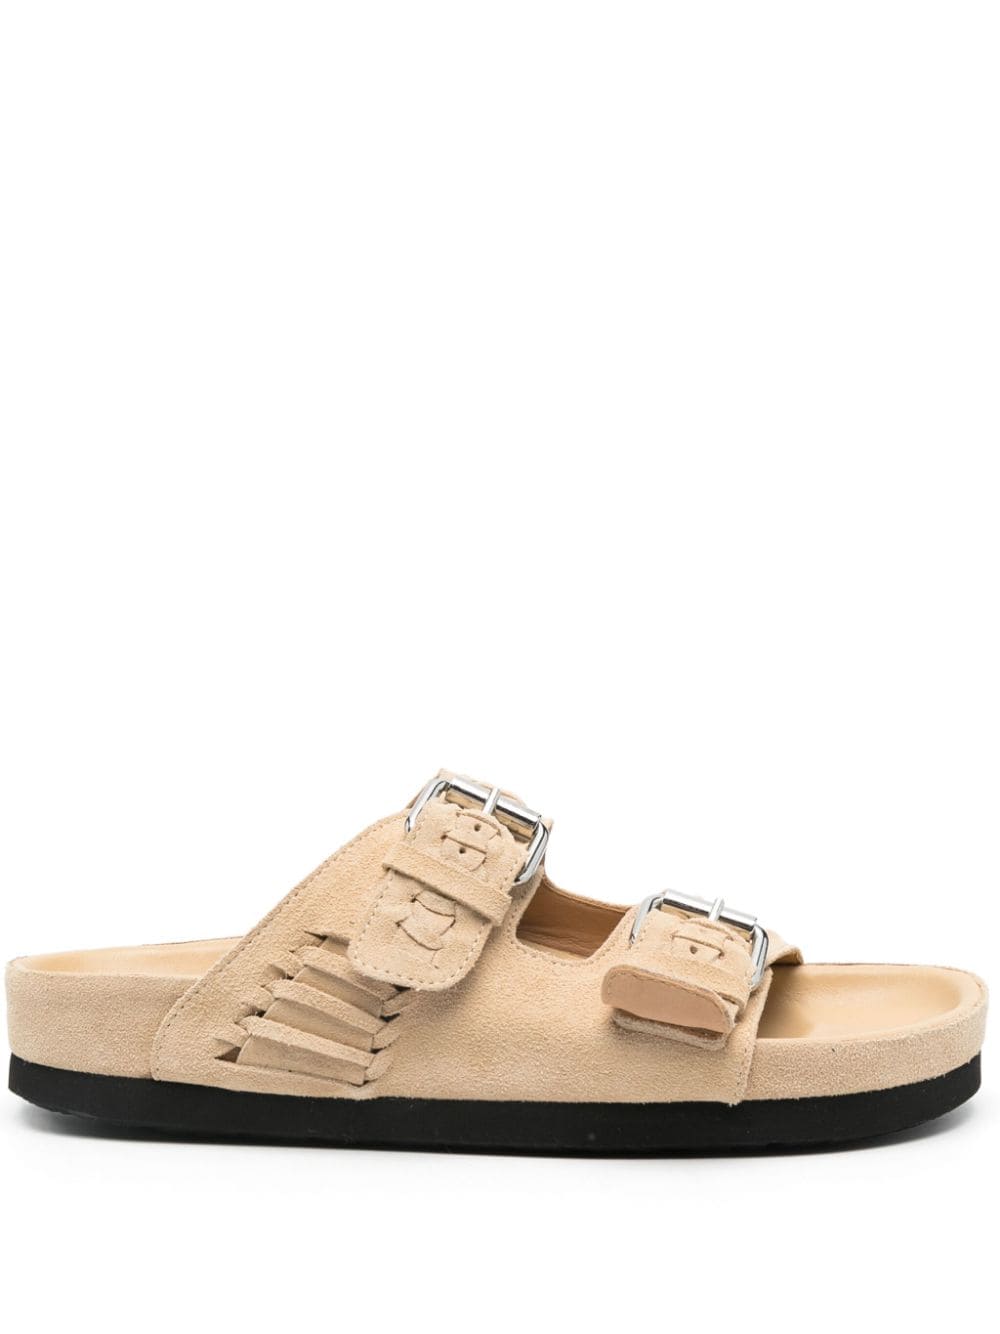 Isabel Marant Braided Suede Flat Sandals In Neutral